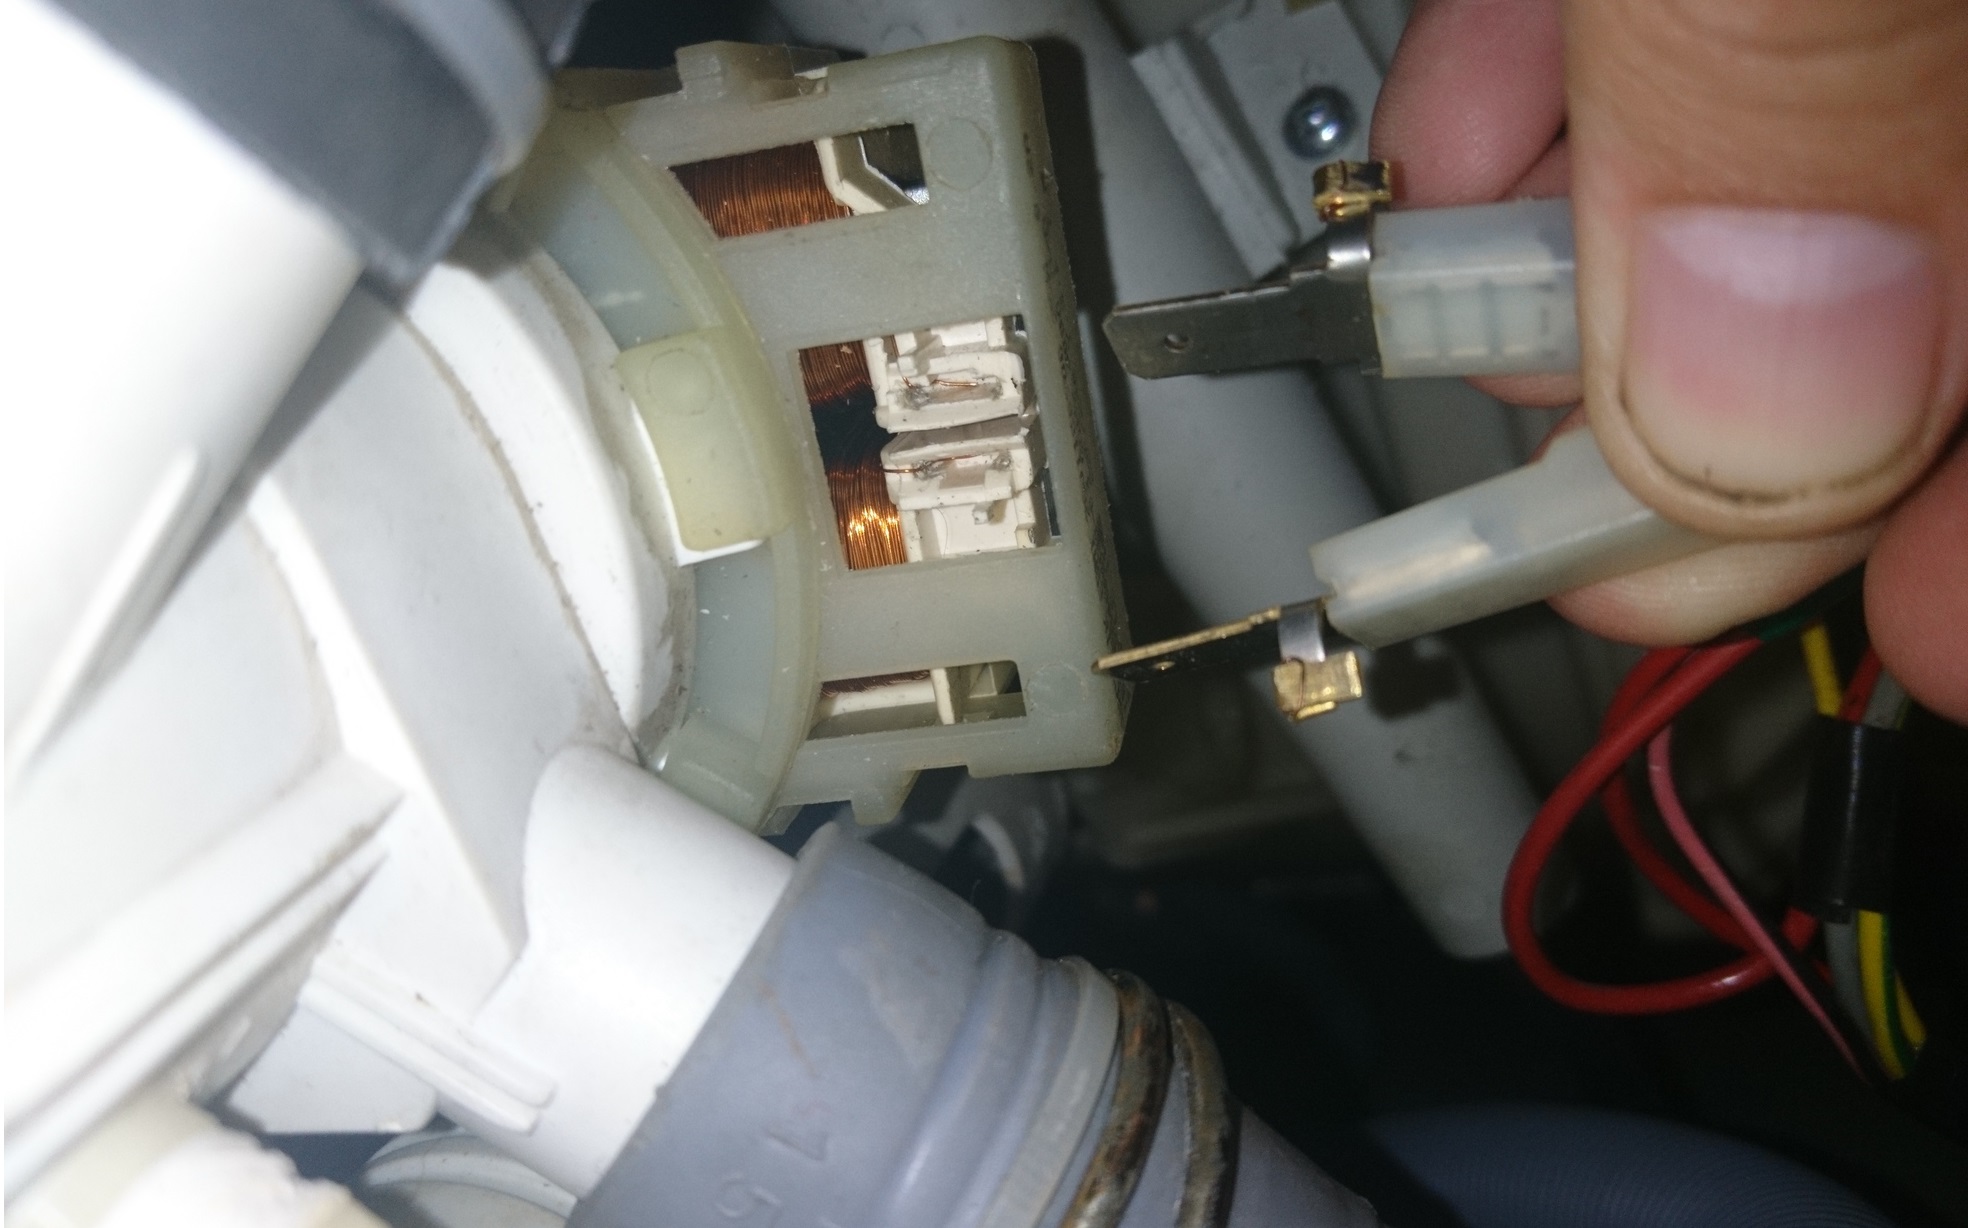 How to connect the pump wires of an LG washing machine